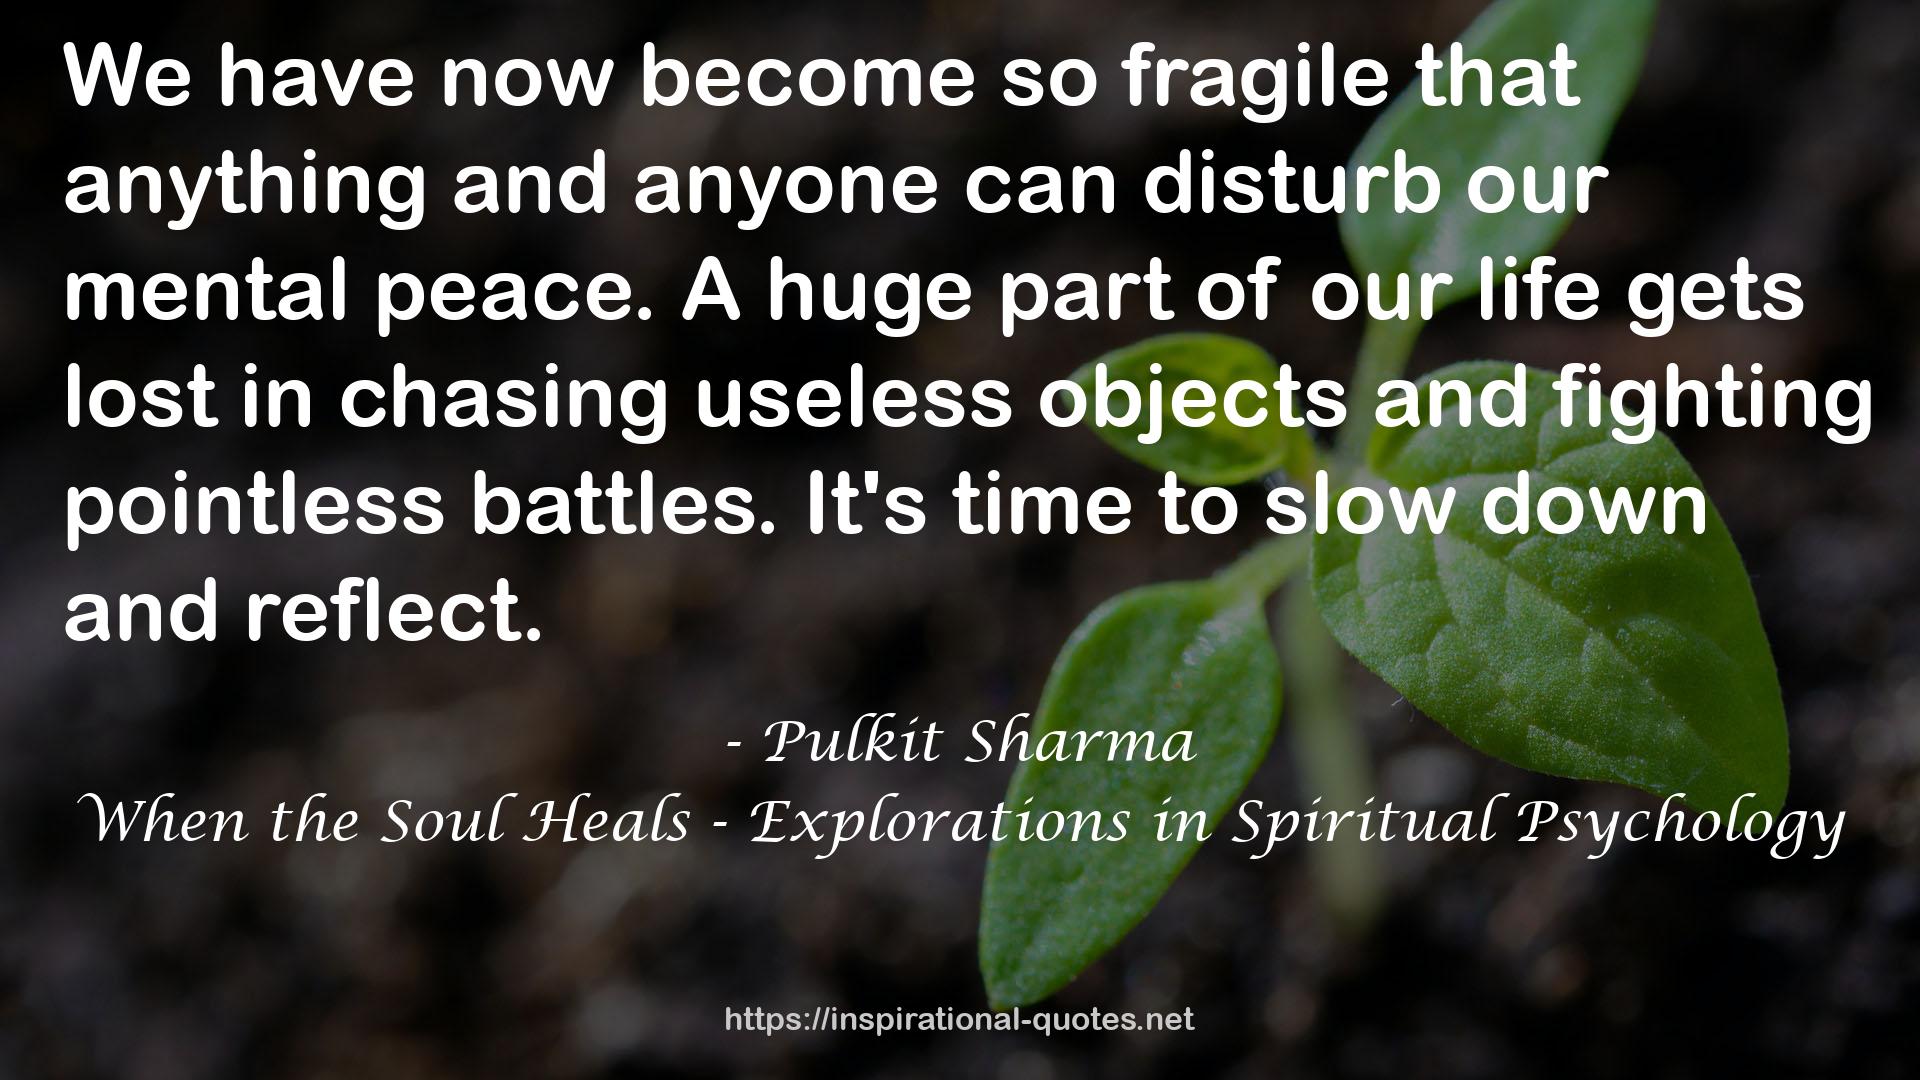 When the Soul Heals - Explorations in Spiritual Psychology QUOTES